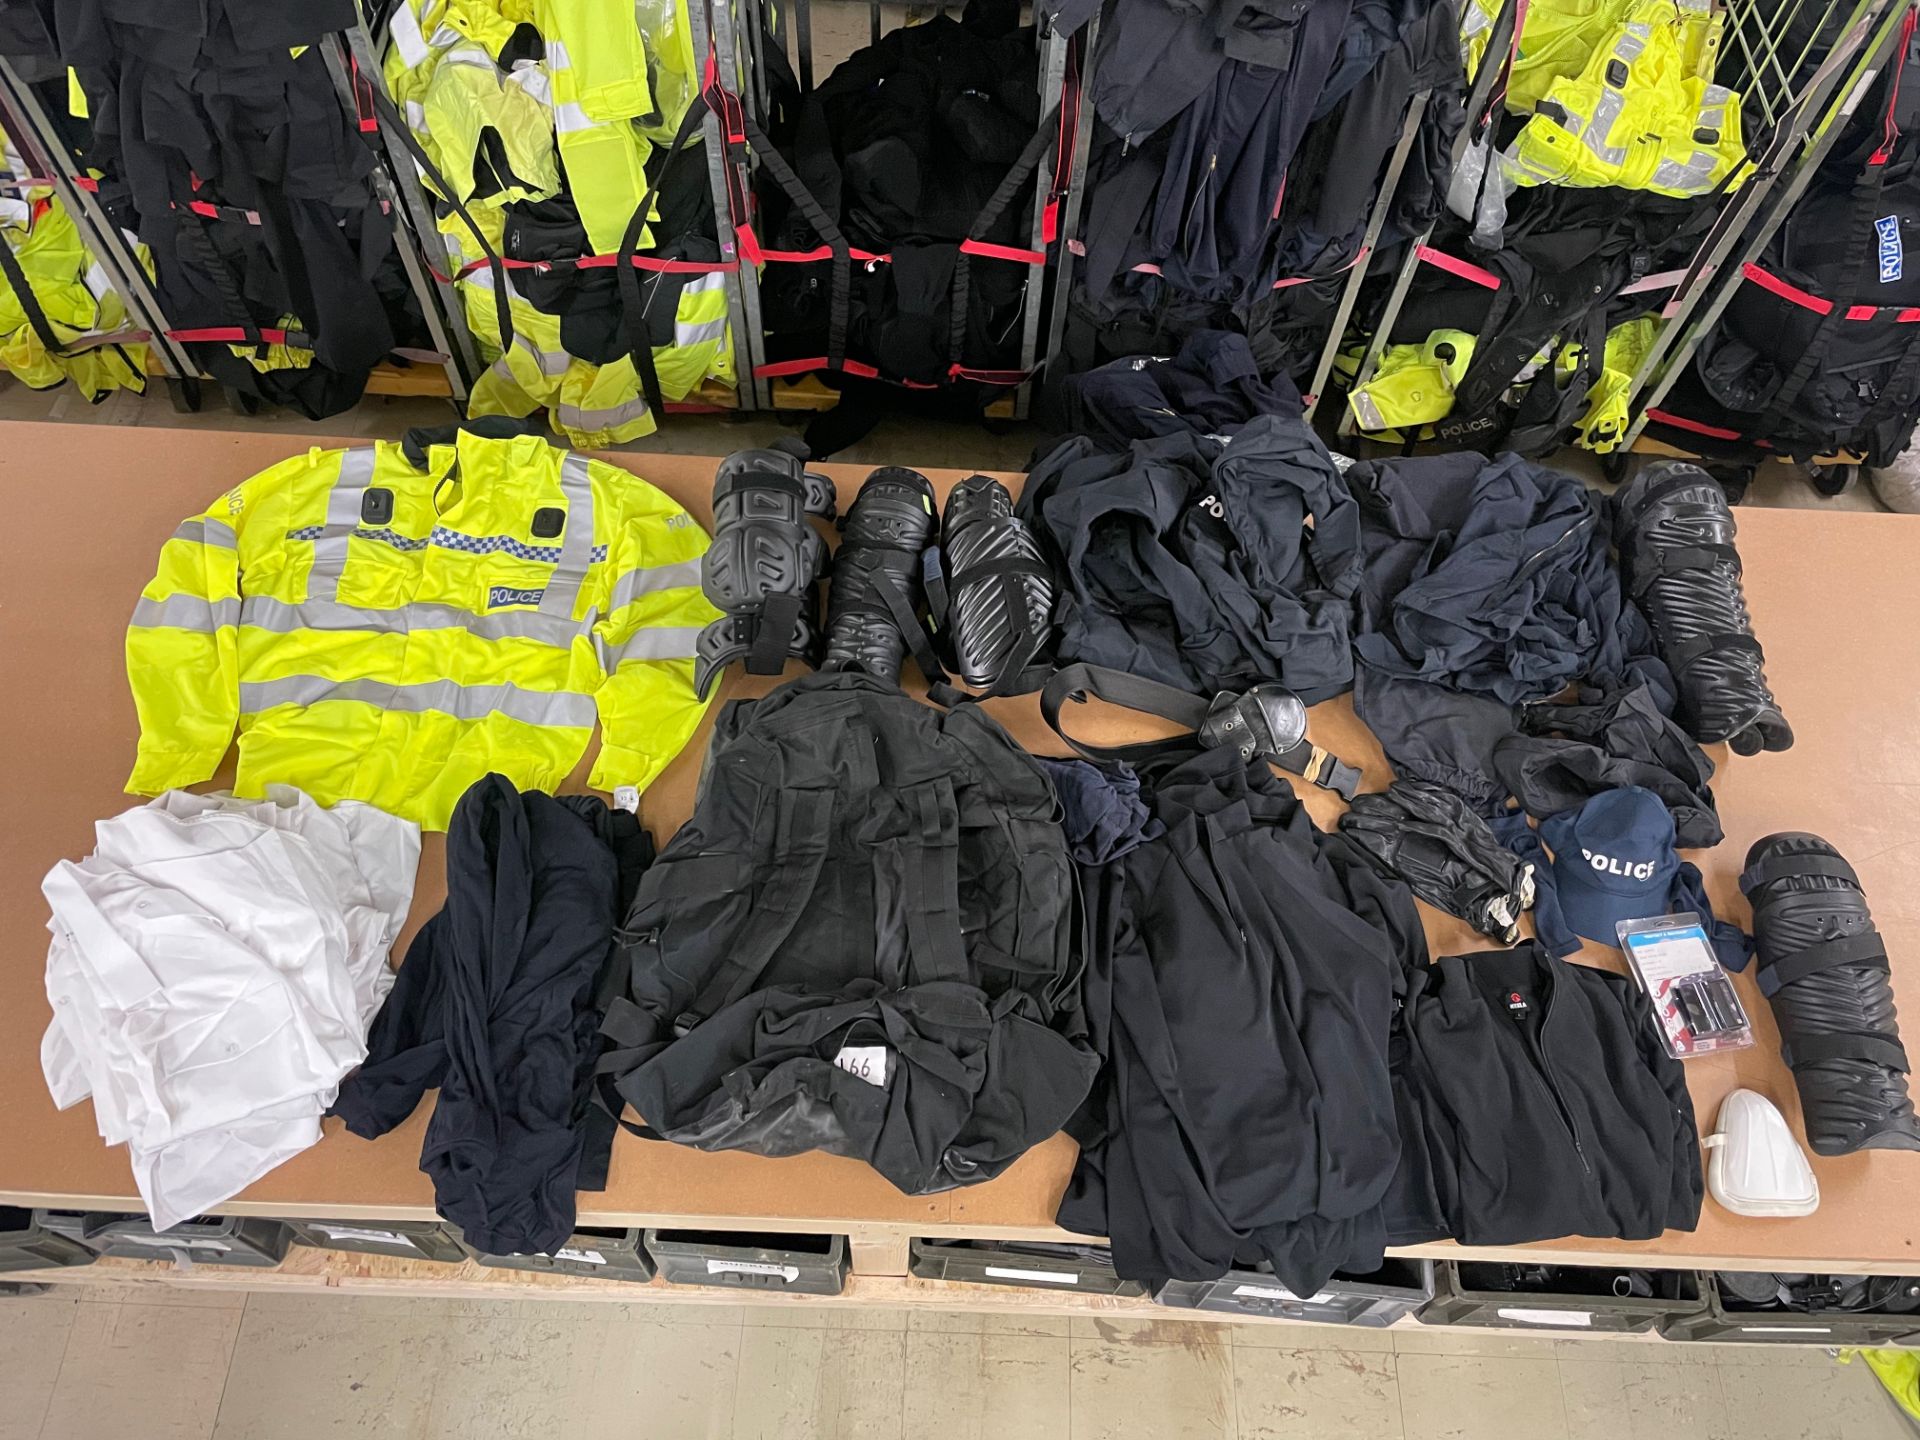 SINGLE BAG MIXED POLICE CLOTHING & ACCESSORIES - RRP £275.00 - Image 10 of 12